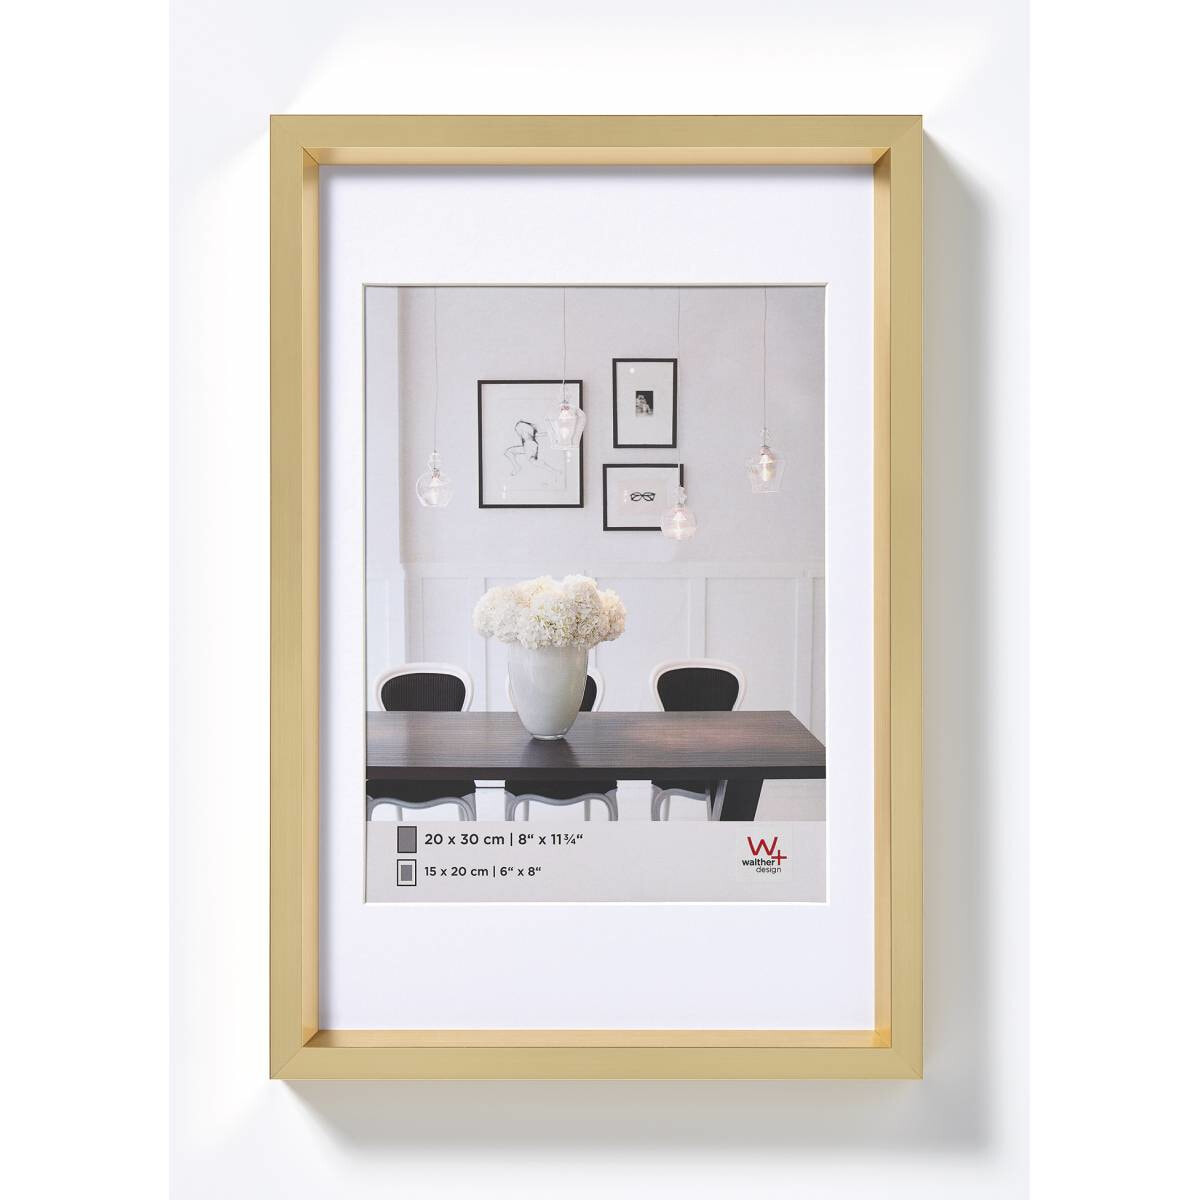 Walther Design ES040G - Plastic - Gold - Single picture frame - Wall - 20 x 30 cm - Rectangular